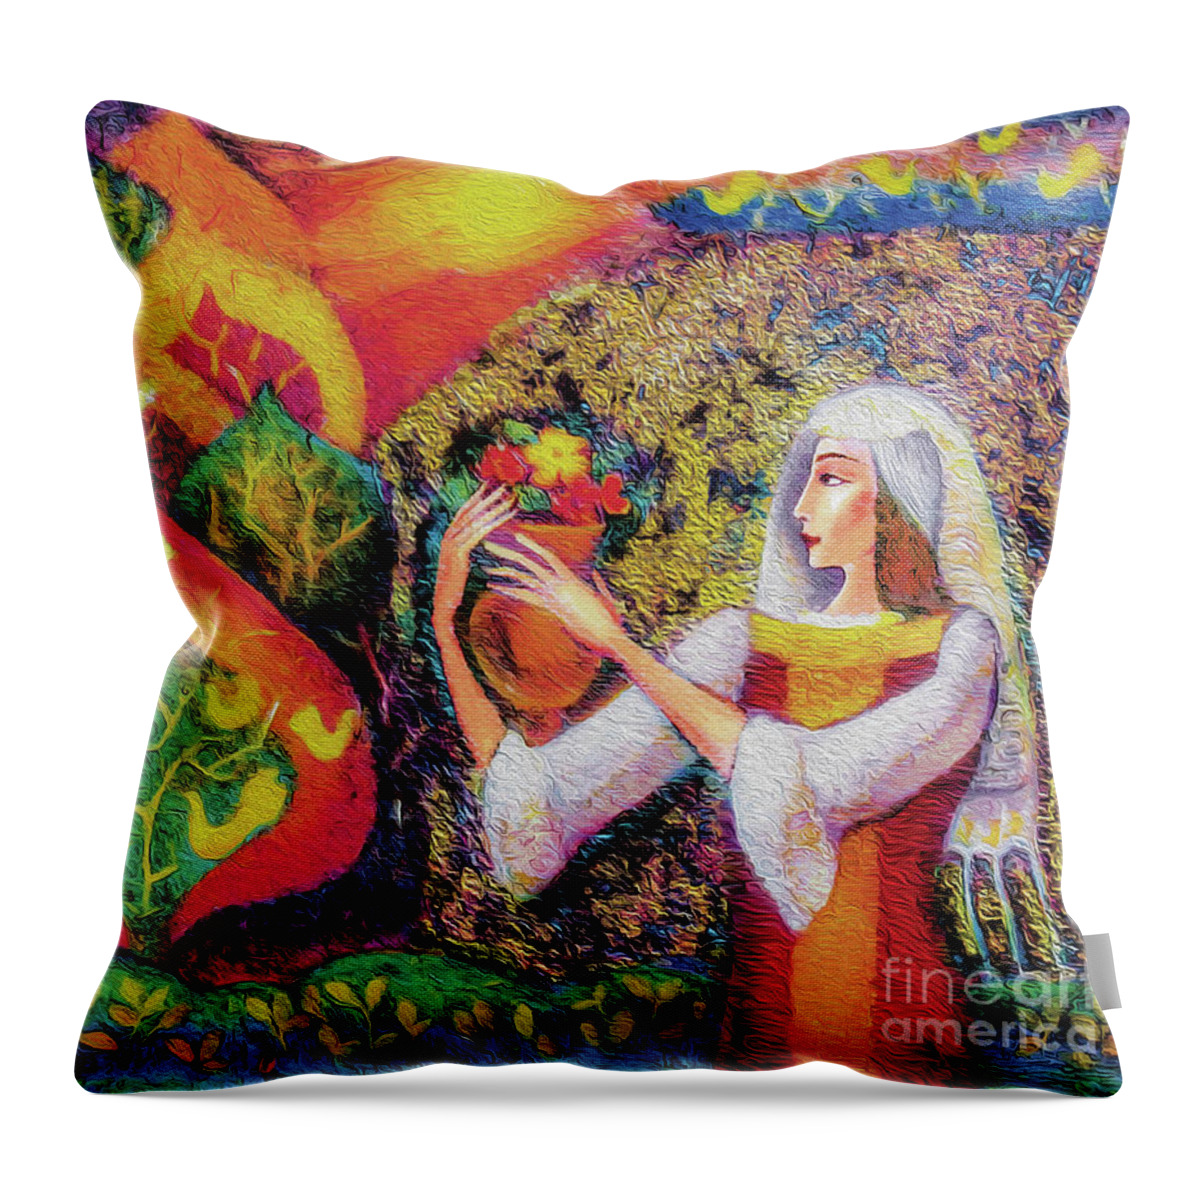 Ethnic Woman Throw Pillow featuring the painting Golden Forest by Eva Campbell